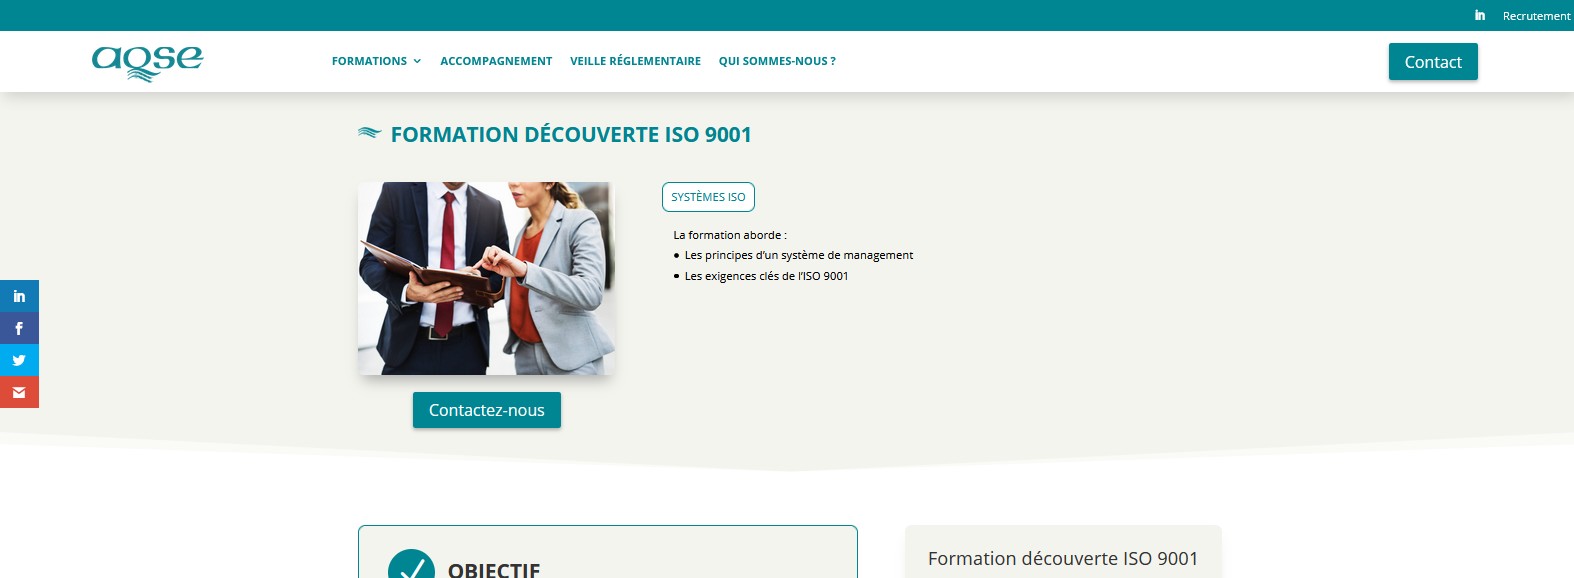 Formation ISO 9001 découverte